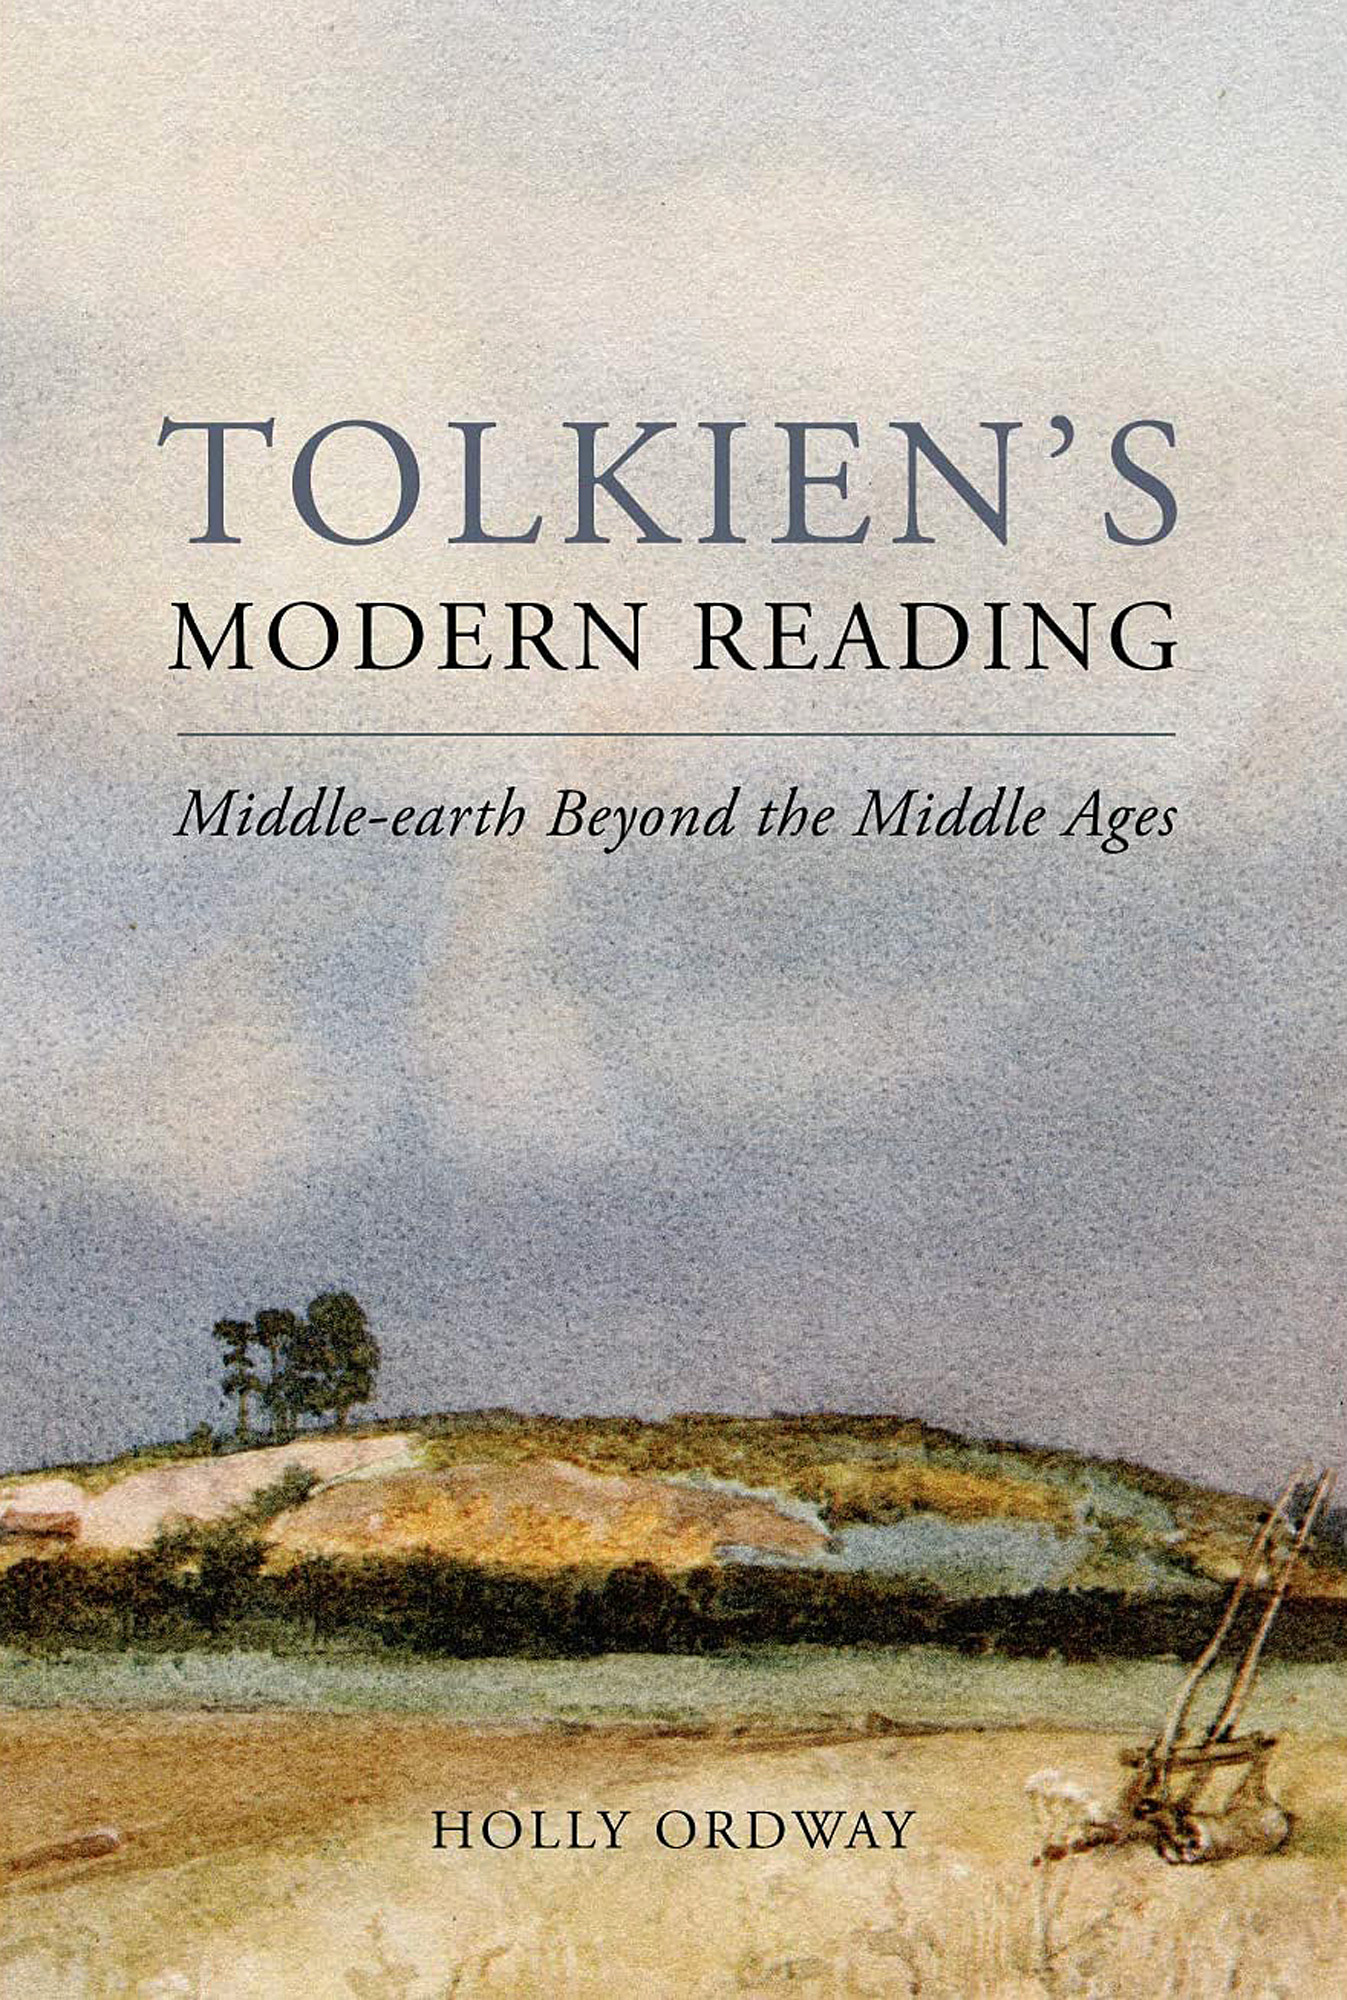 Читать средиземье. Tolkien’s Modern reading: Middle-Earth Beyond the Middle ages by Holly Ordway. Модерн Толкин. Tolkien's Modern reading: Middle-Earth Beyond the Middle ages Holly Ordway.